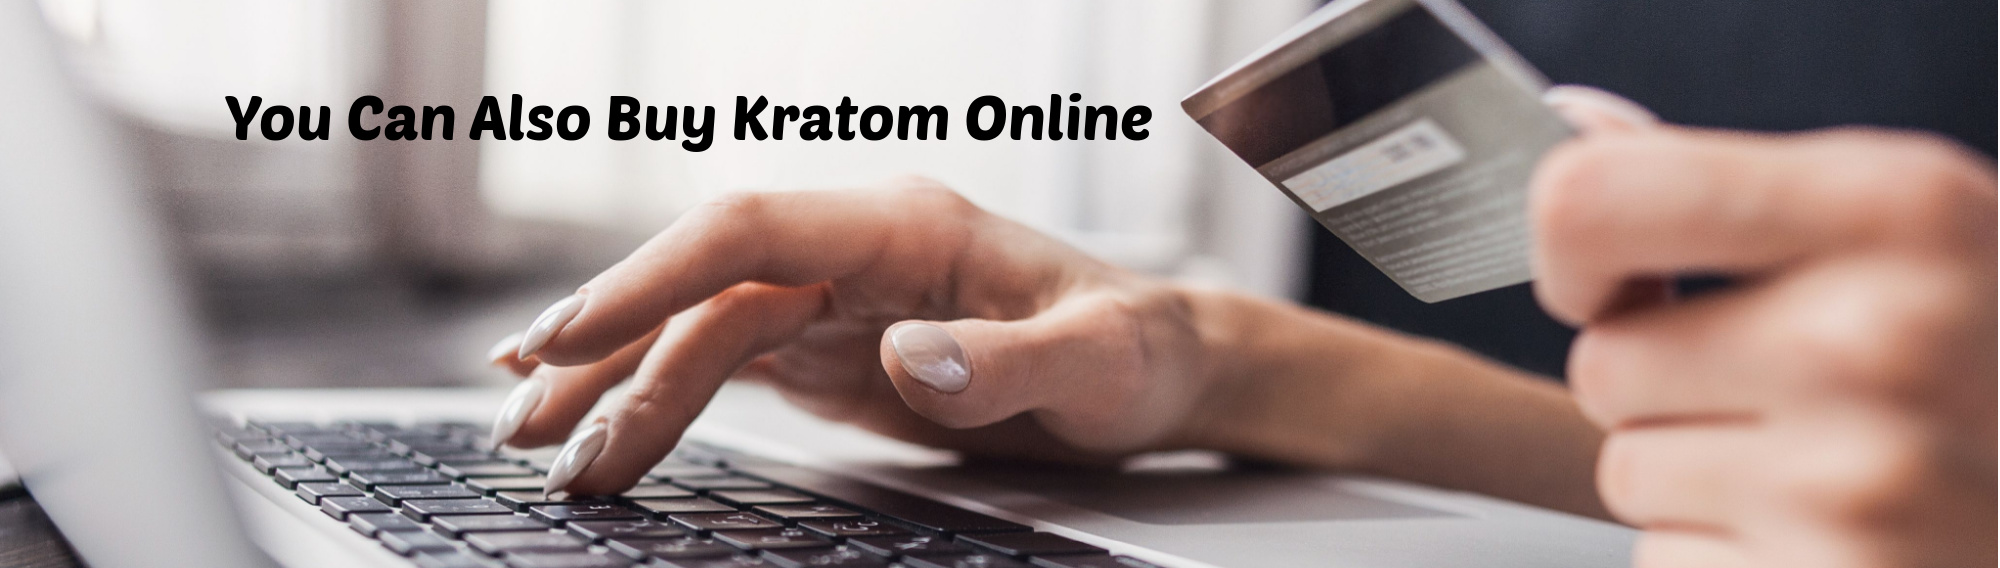 image of you can also buy kratom online